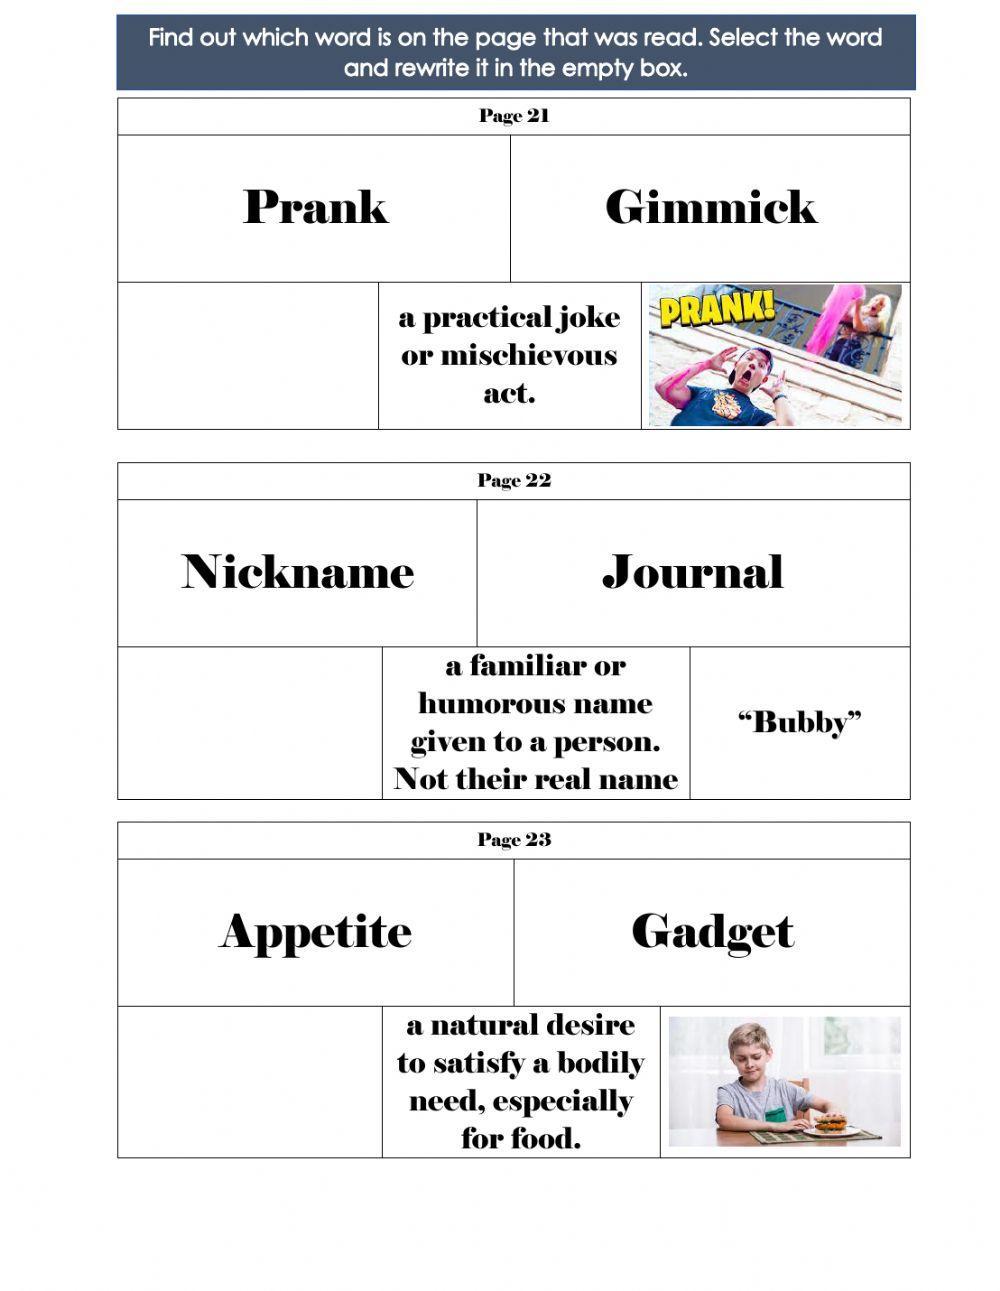 Diary of a Wimpy Kid- Vocab lIst (Page 21-30)